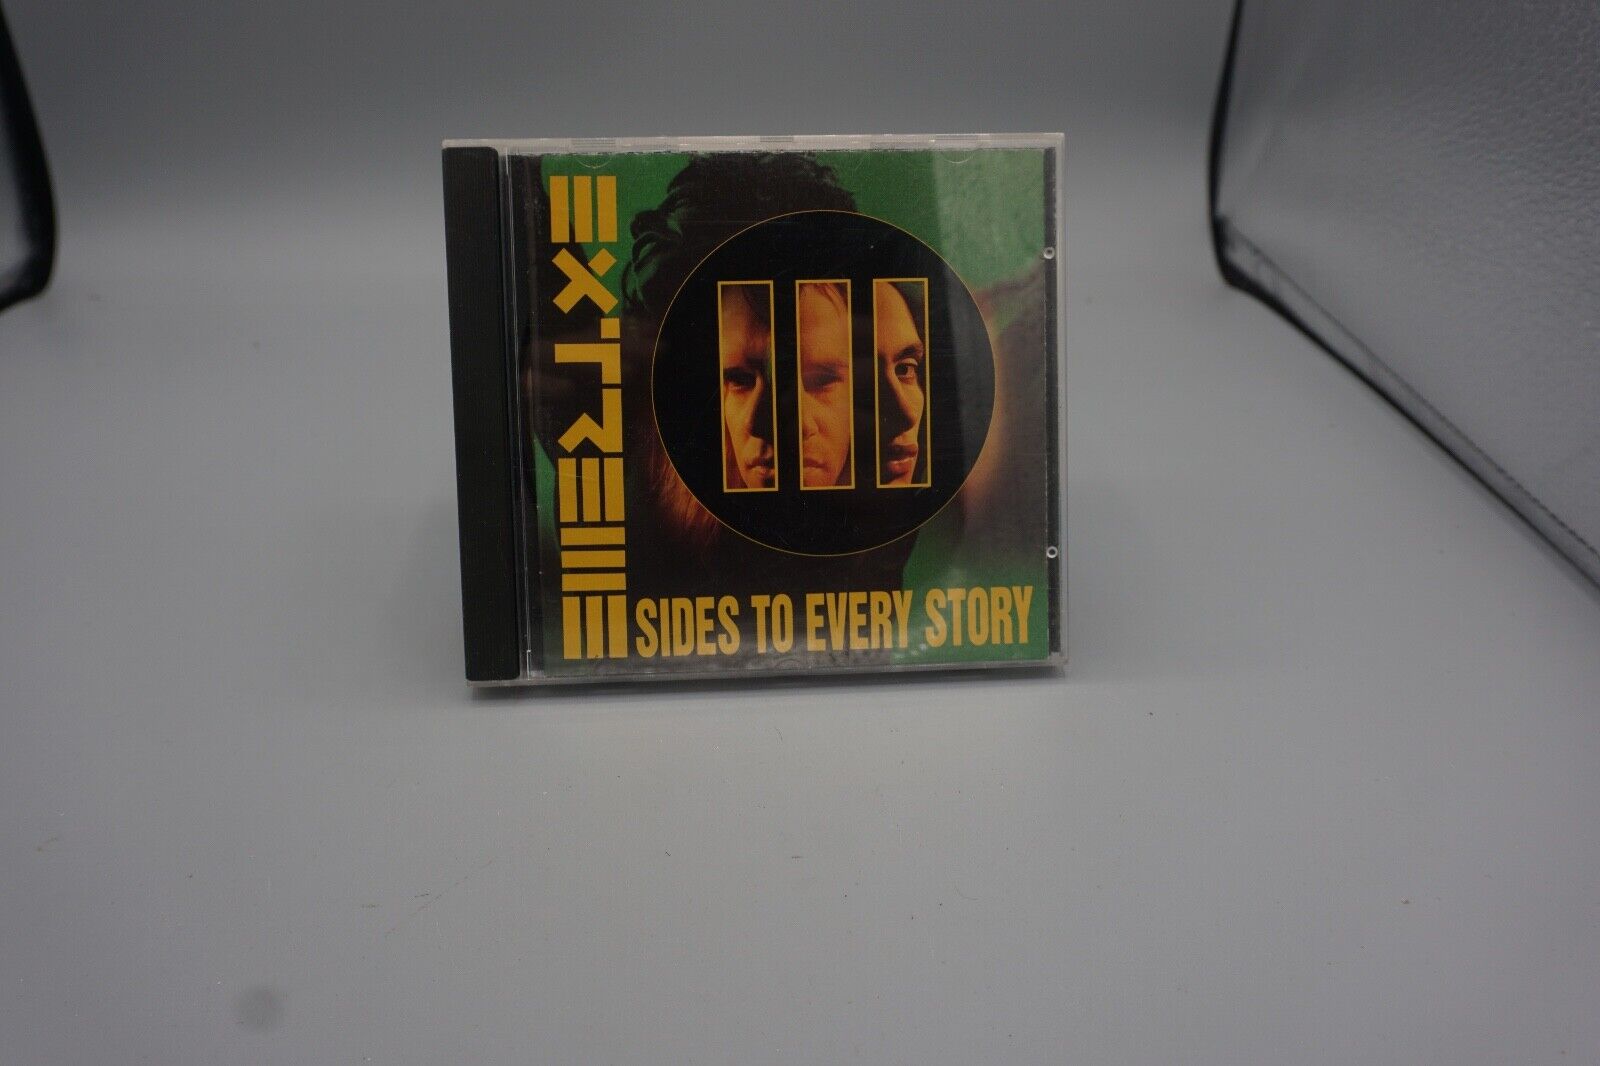 III Sides to Every Story - Audio CD By Extreme -- Very Good -- Free Shipping